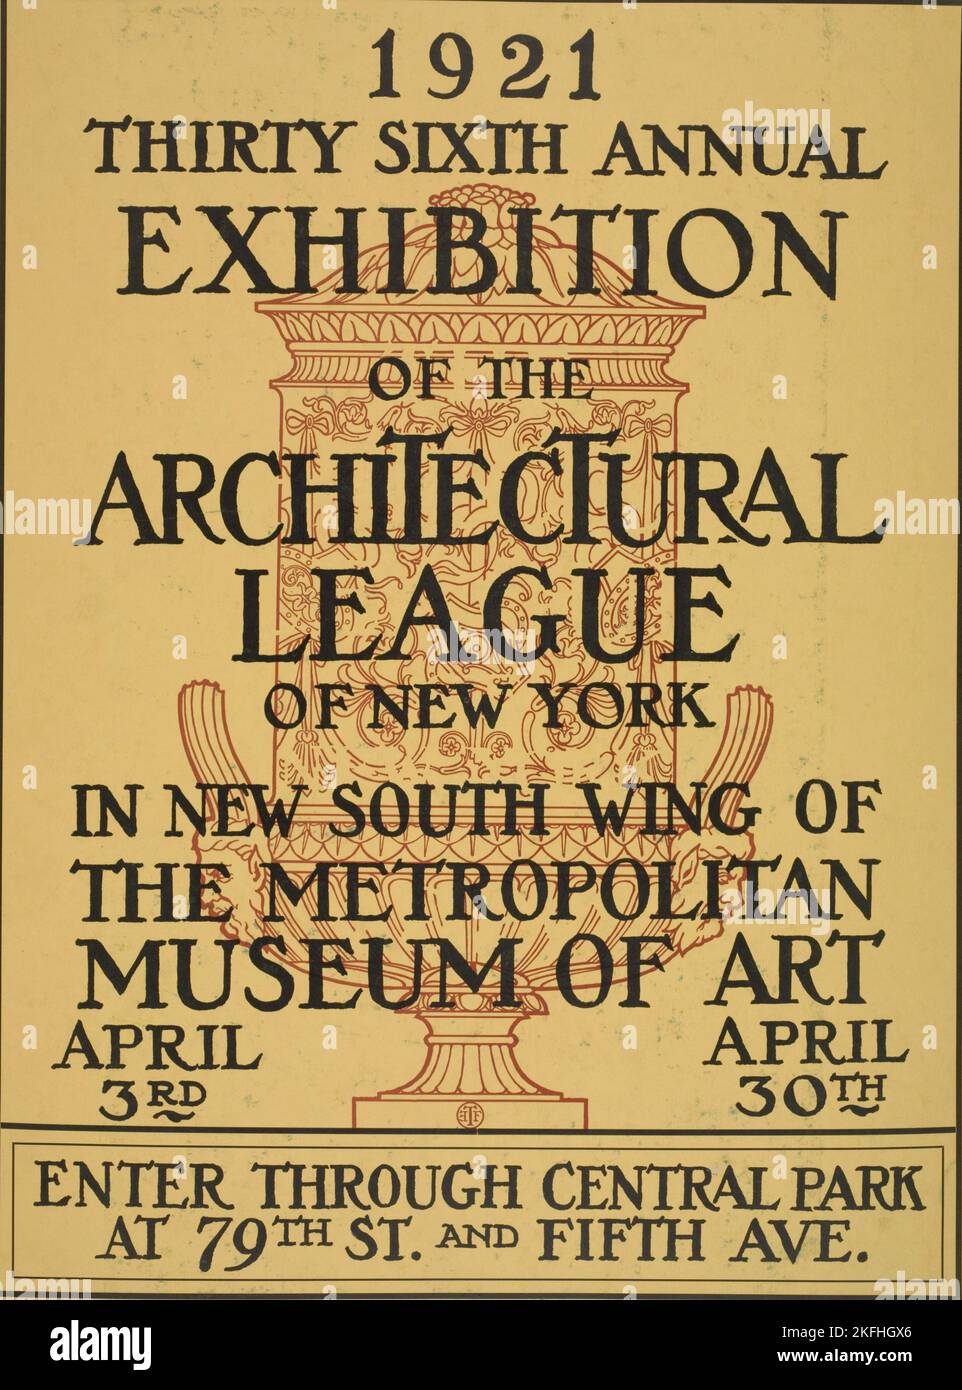 1921 thirty sixth annual exhibition of the architectural league of New York, c1921. Stock Photo